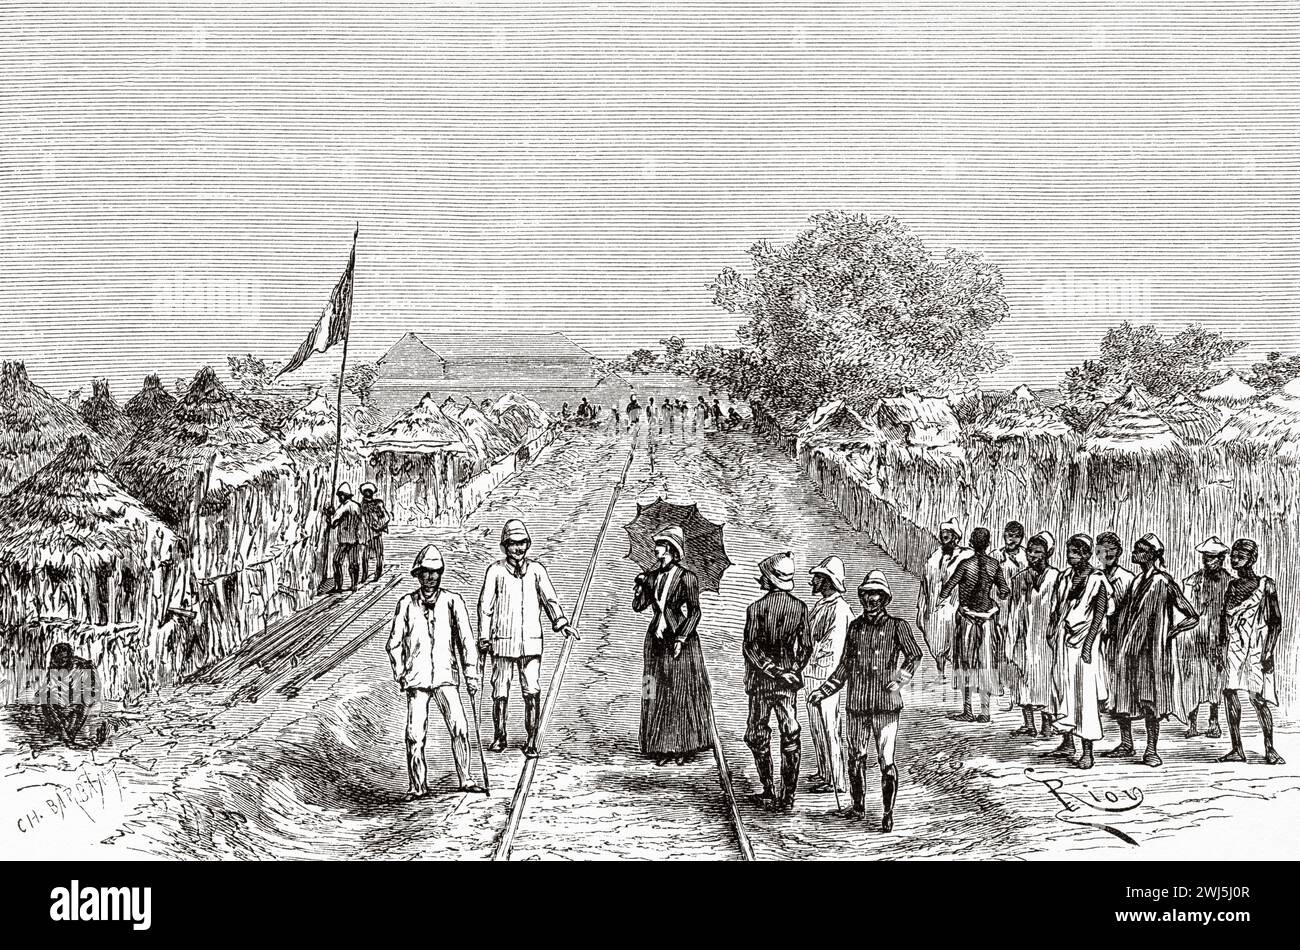 Laying the last rail of the railway in Bafoulabé, Guinea. Africa. Two campaigns in French Sudan, 1886-1888 by Joseph Simon Gallieni (1849 - 1916) Le Tour du Monde 1890 Stock Photo